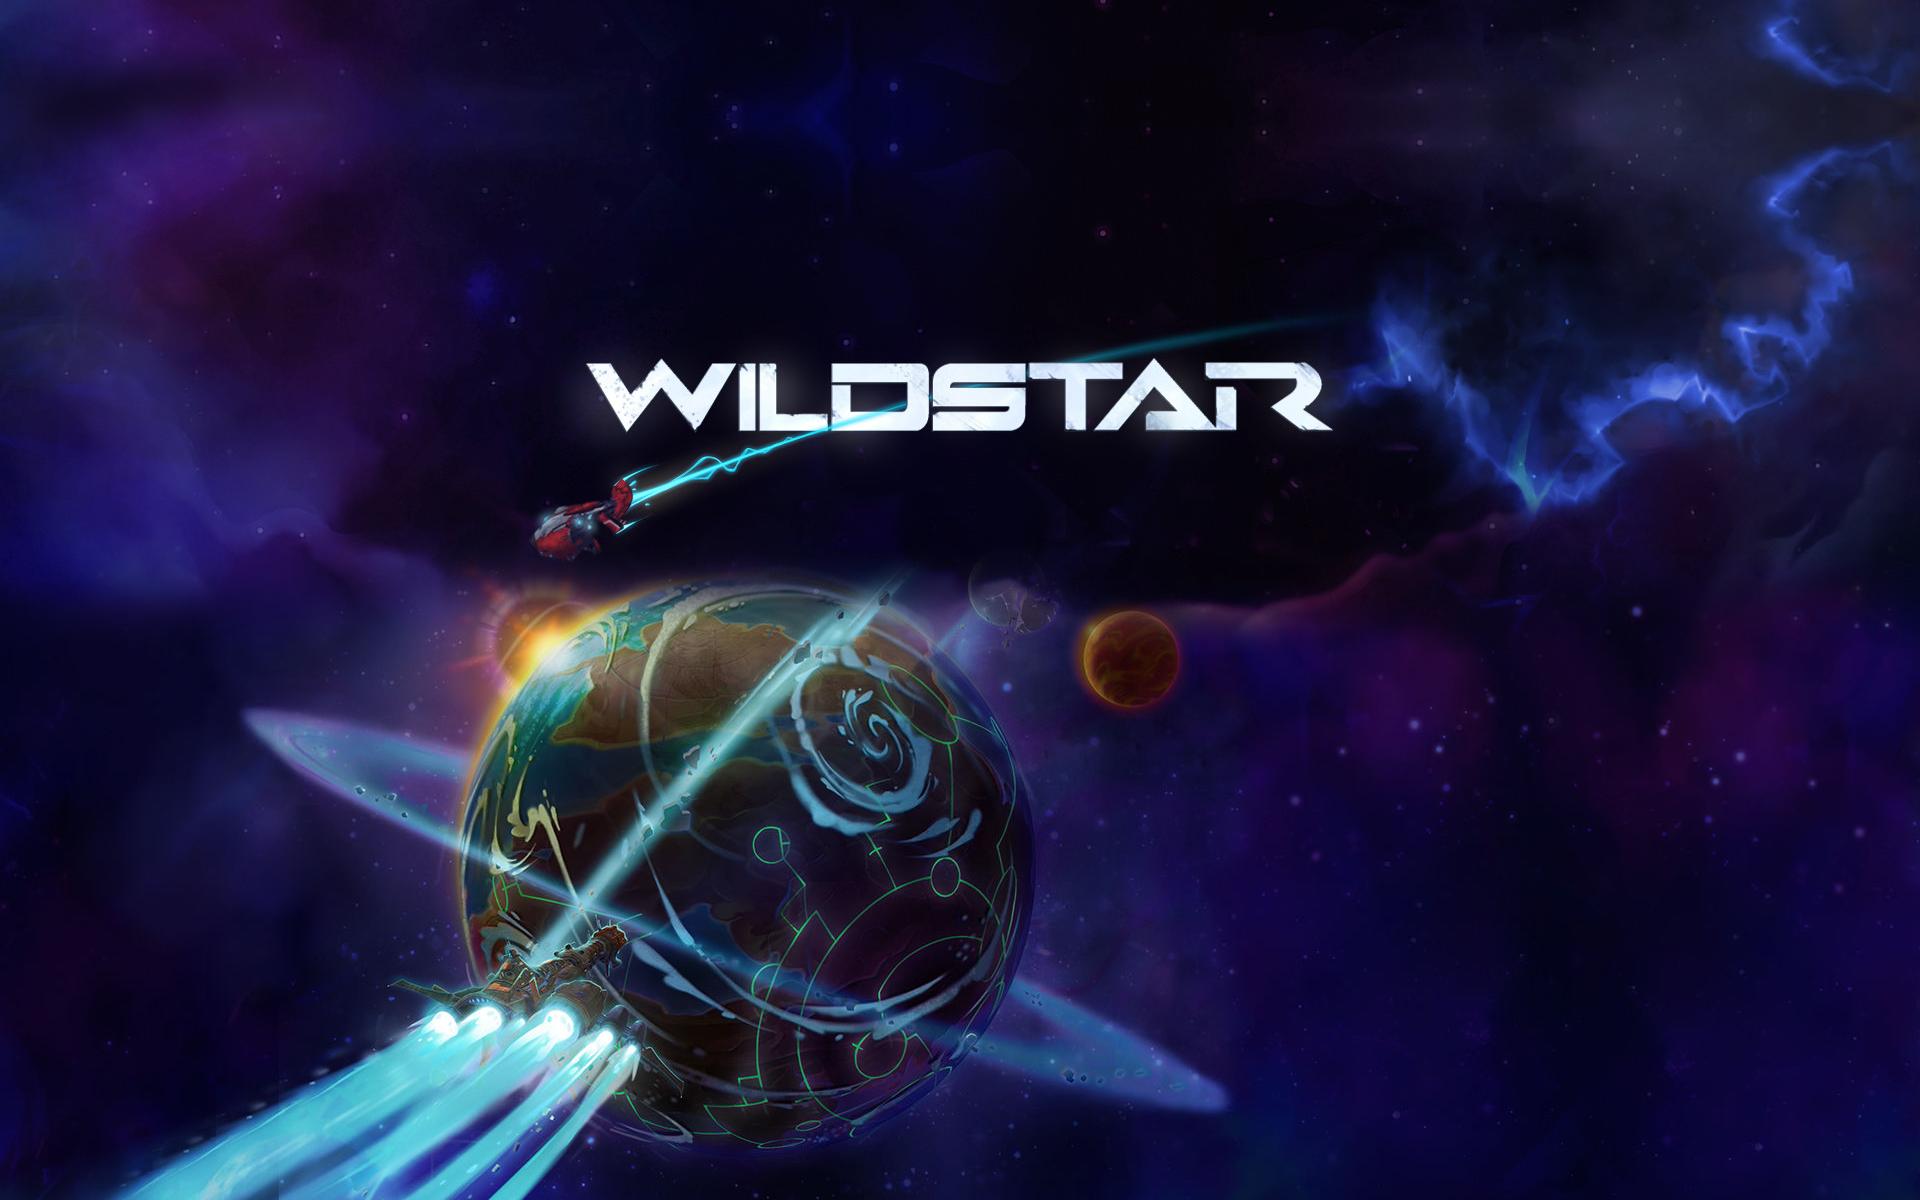 I Made A New Wildstar Desktop Wallpaper Using The Image From